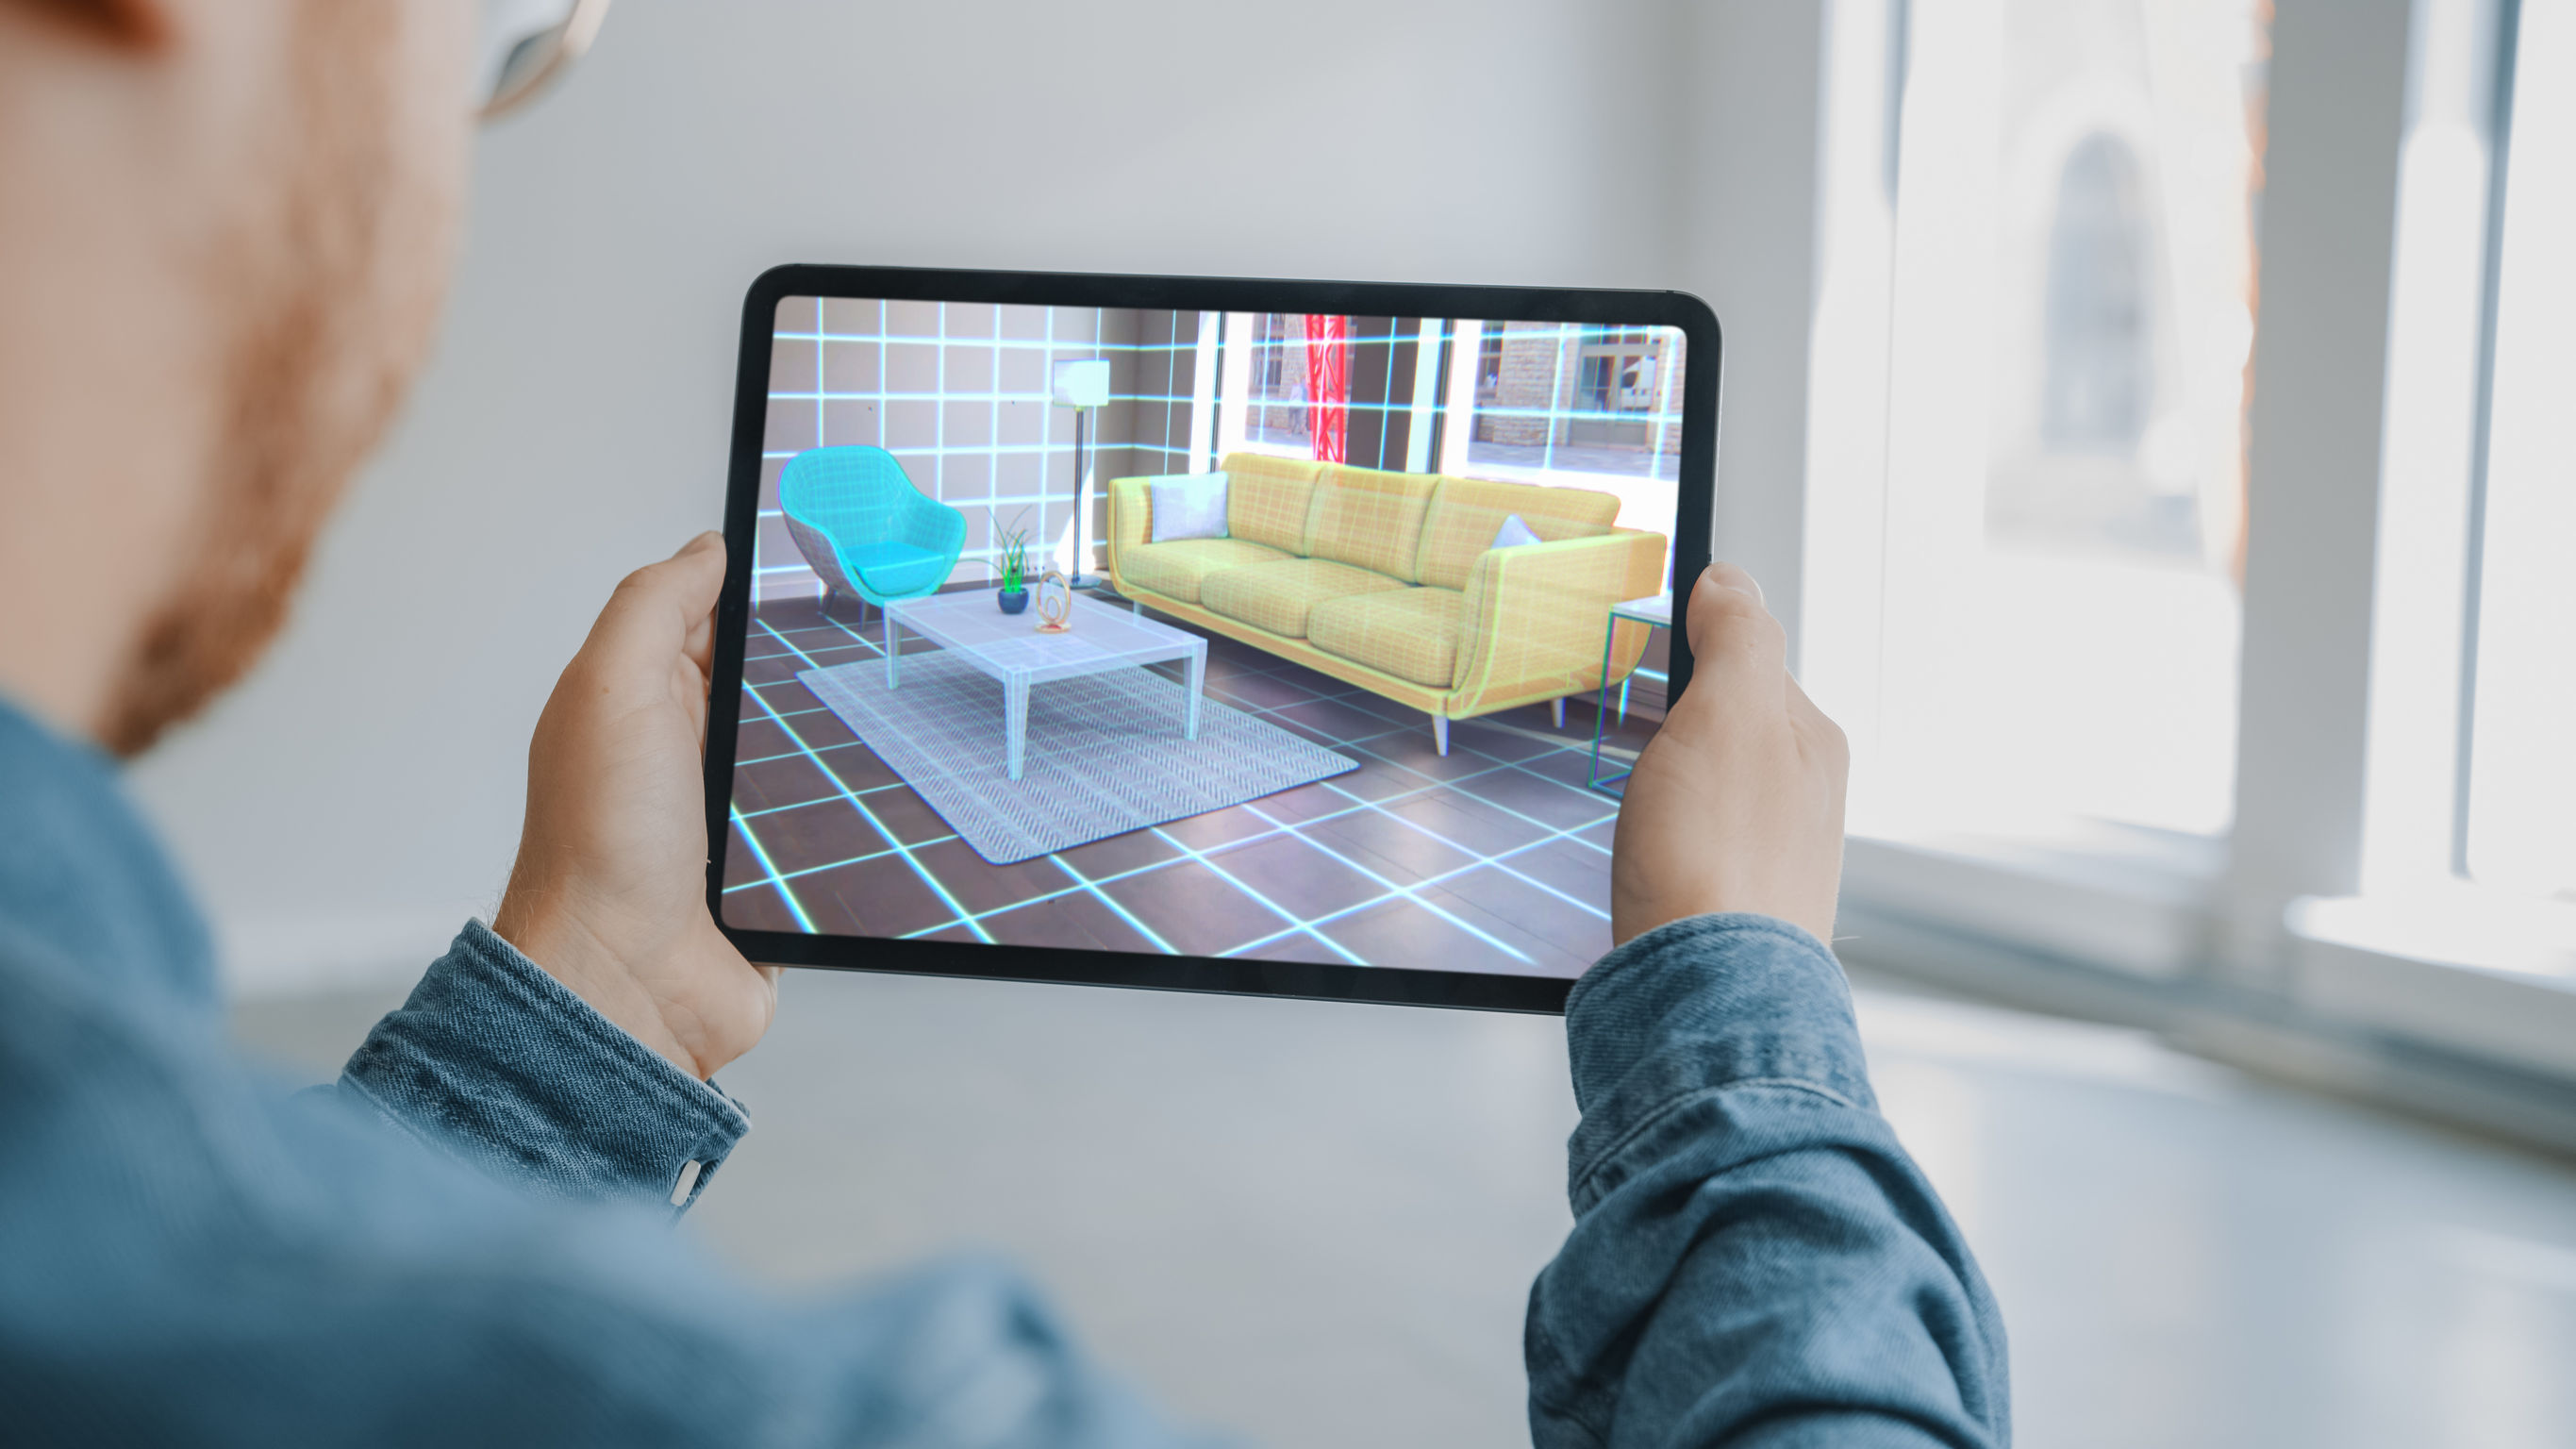 Virtual objects such as furniture can be placed in a real room via AR.  Photo: © Alexei Gorodenkov/123RF.com